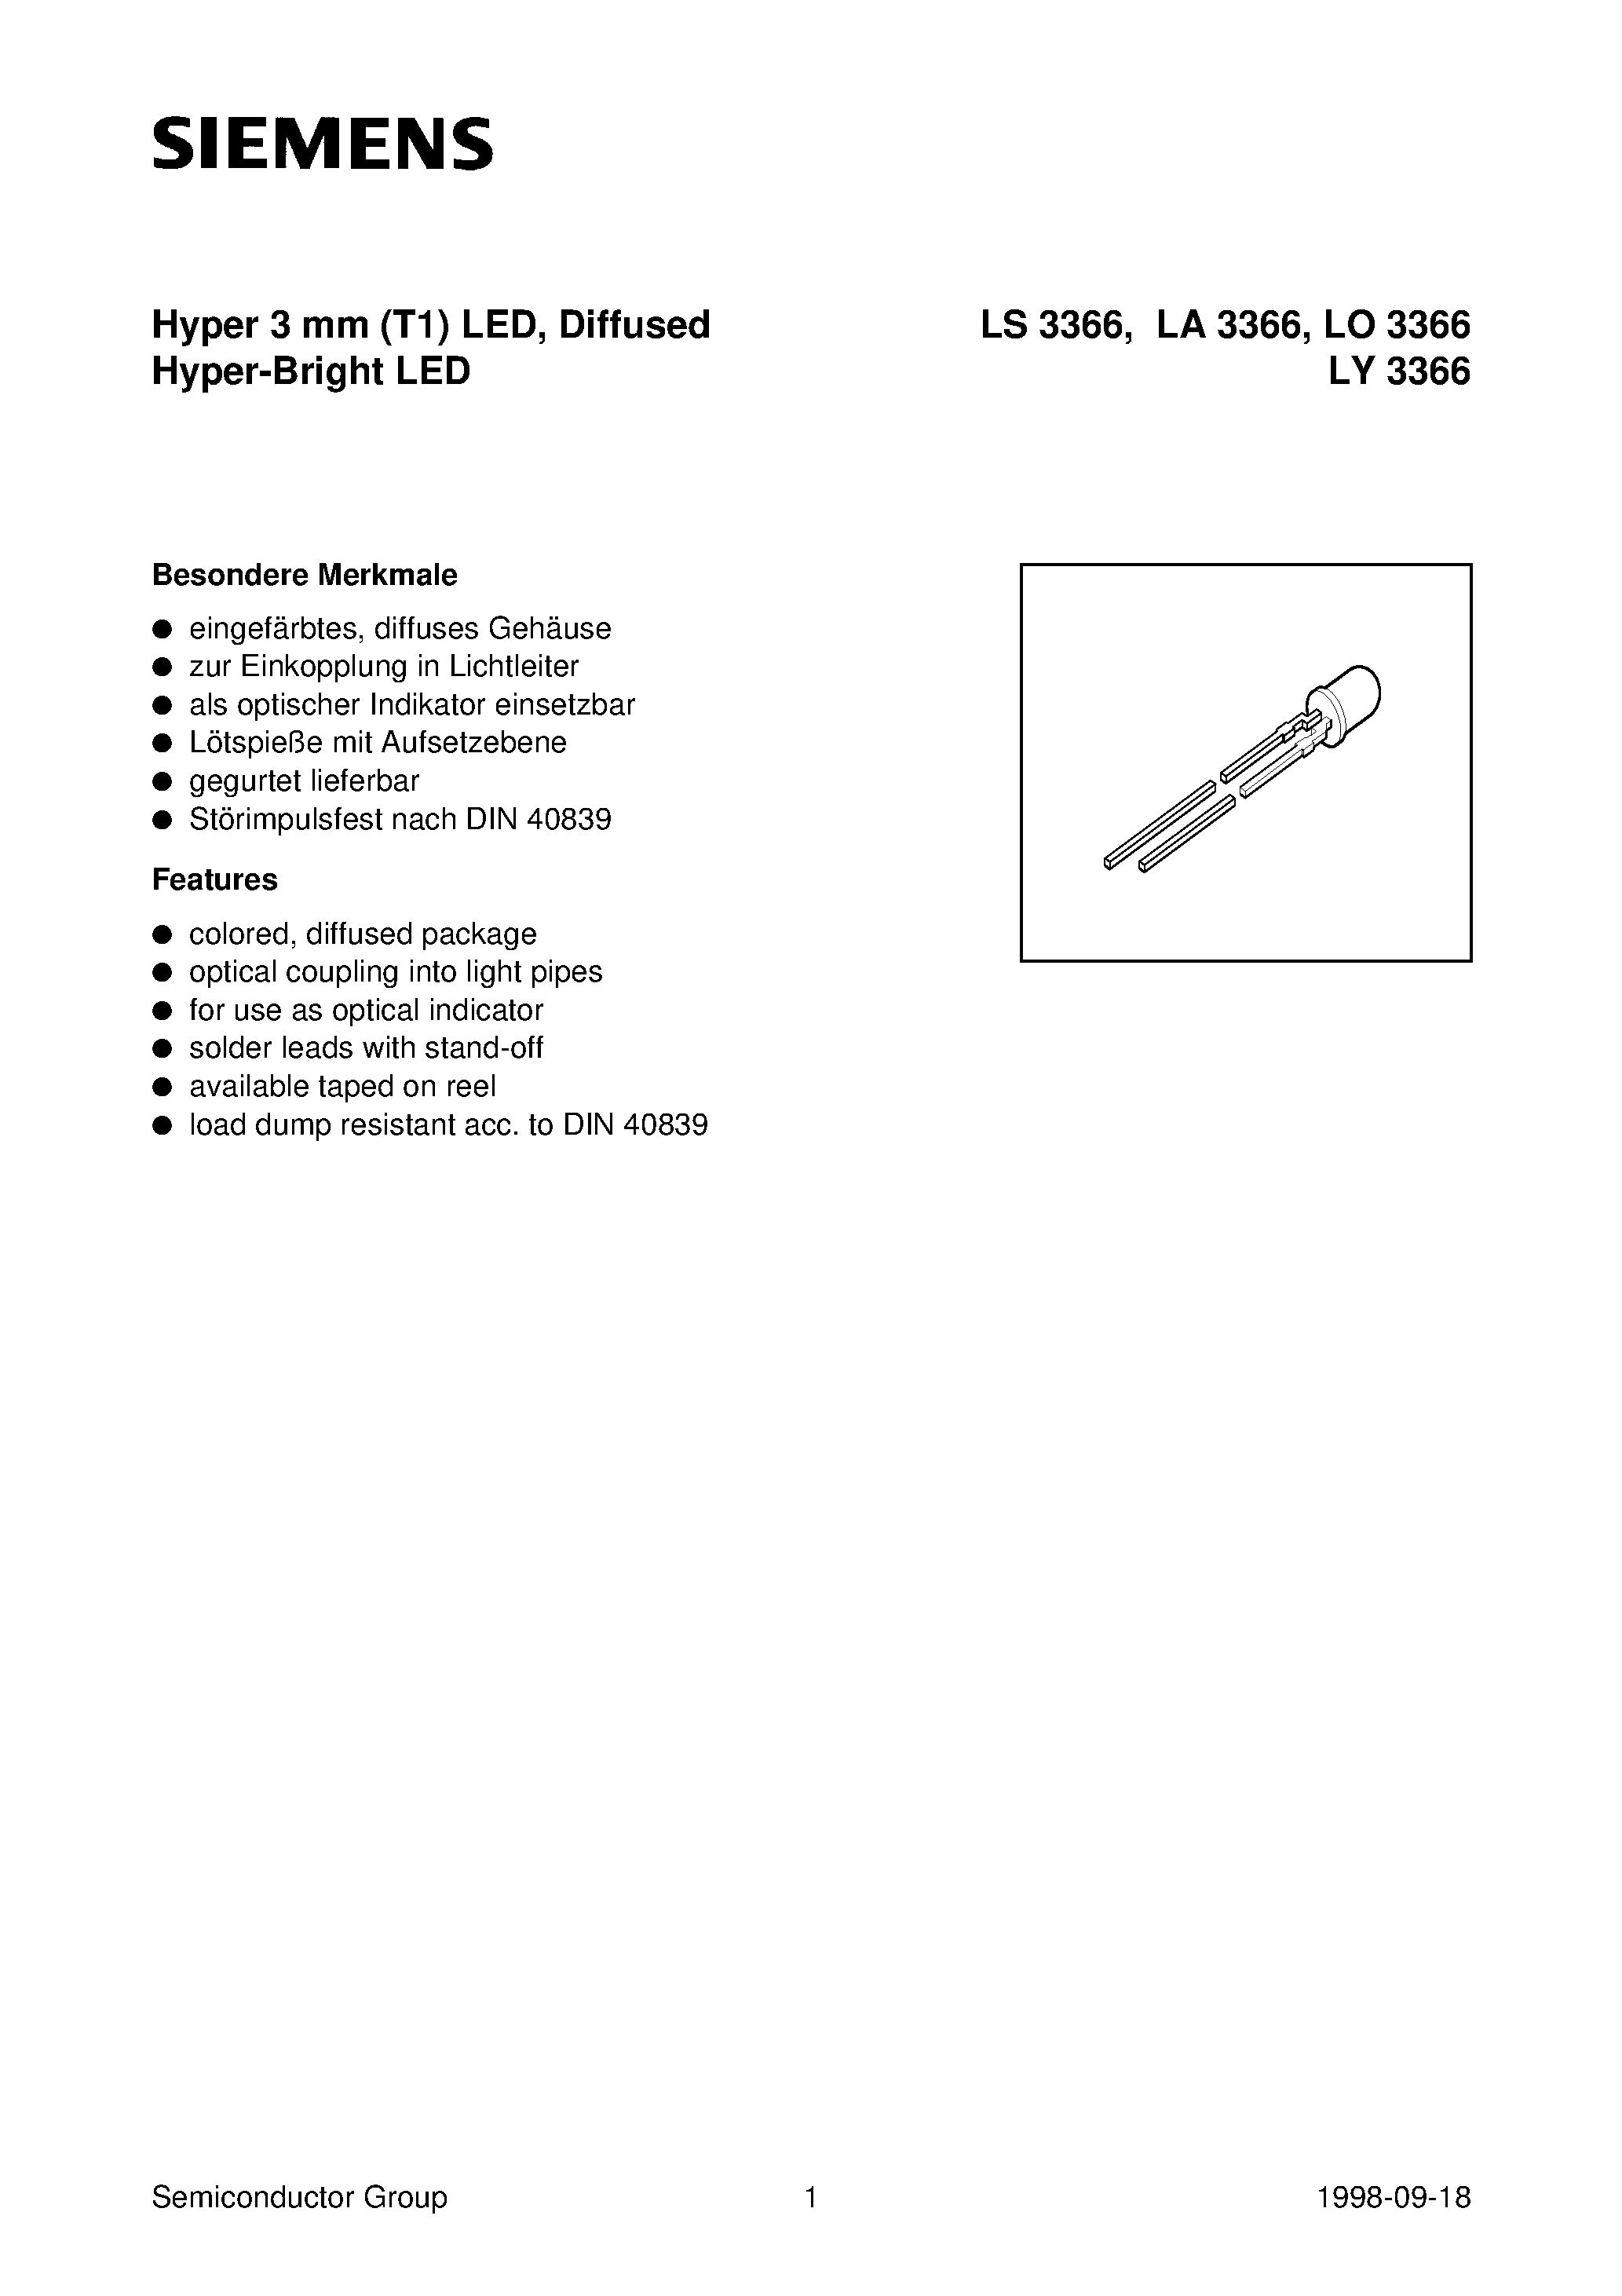 Datasheet LS3366-Q - Hyper 3 mm T1 LED / Diffused Hyper-Bright LED page 1